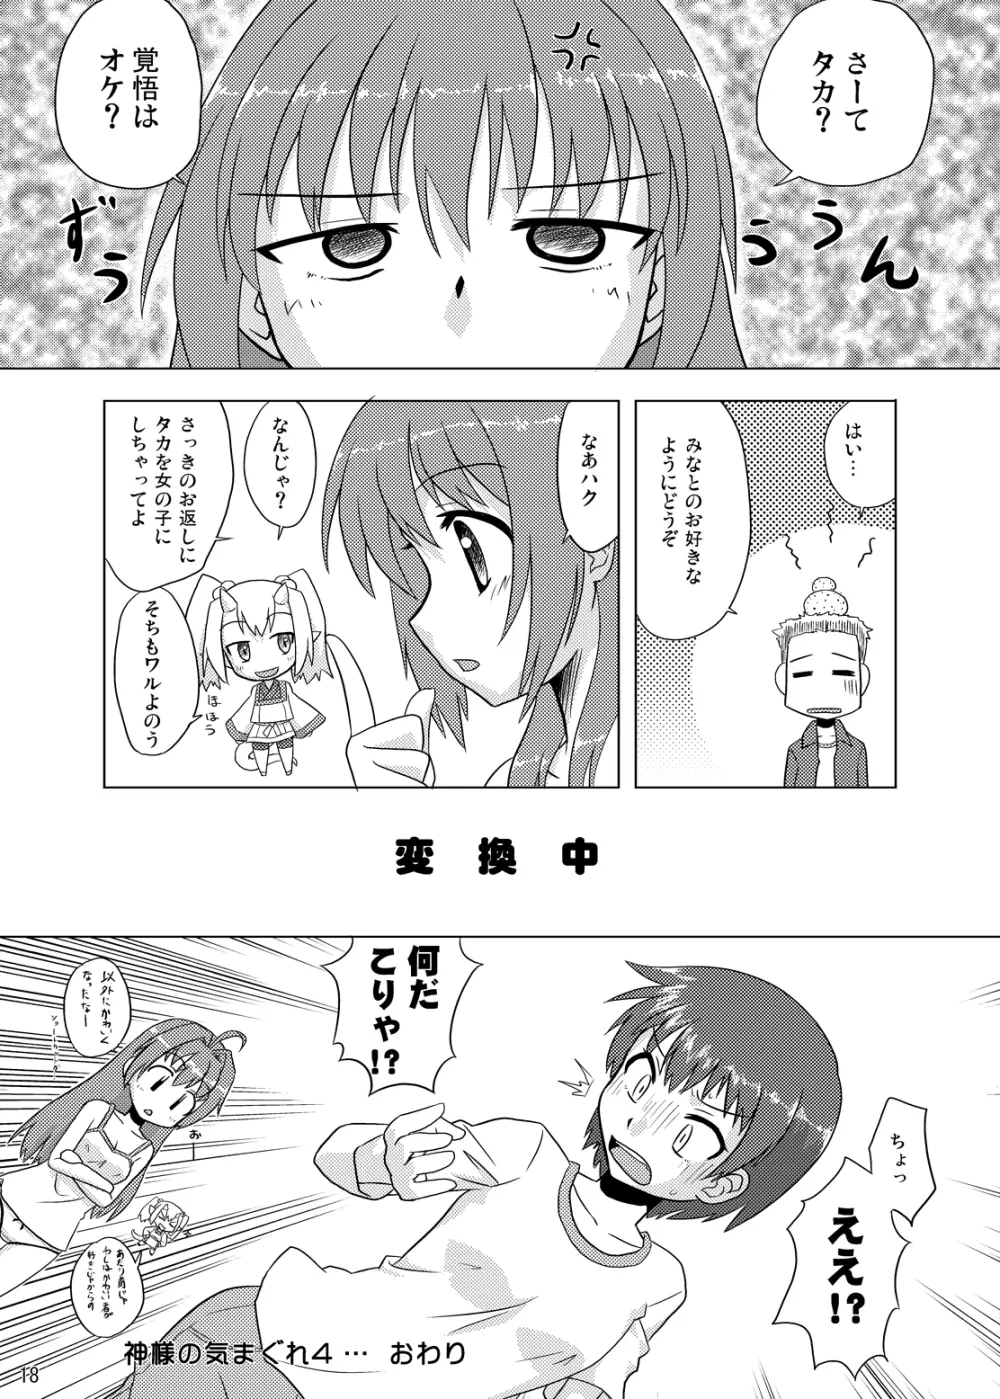 Composition Mix 8 はじマル！6 Page.17